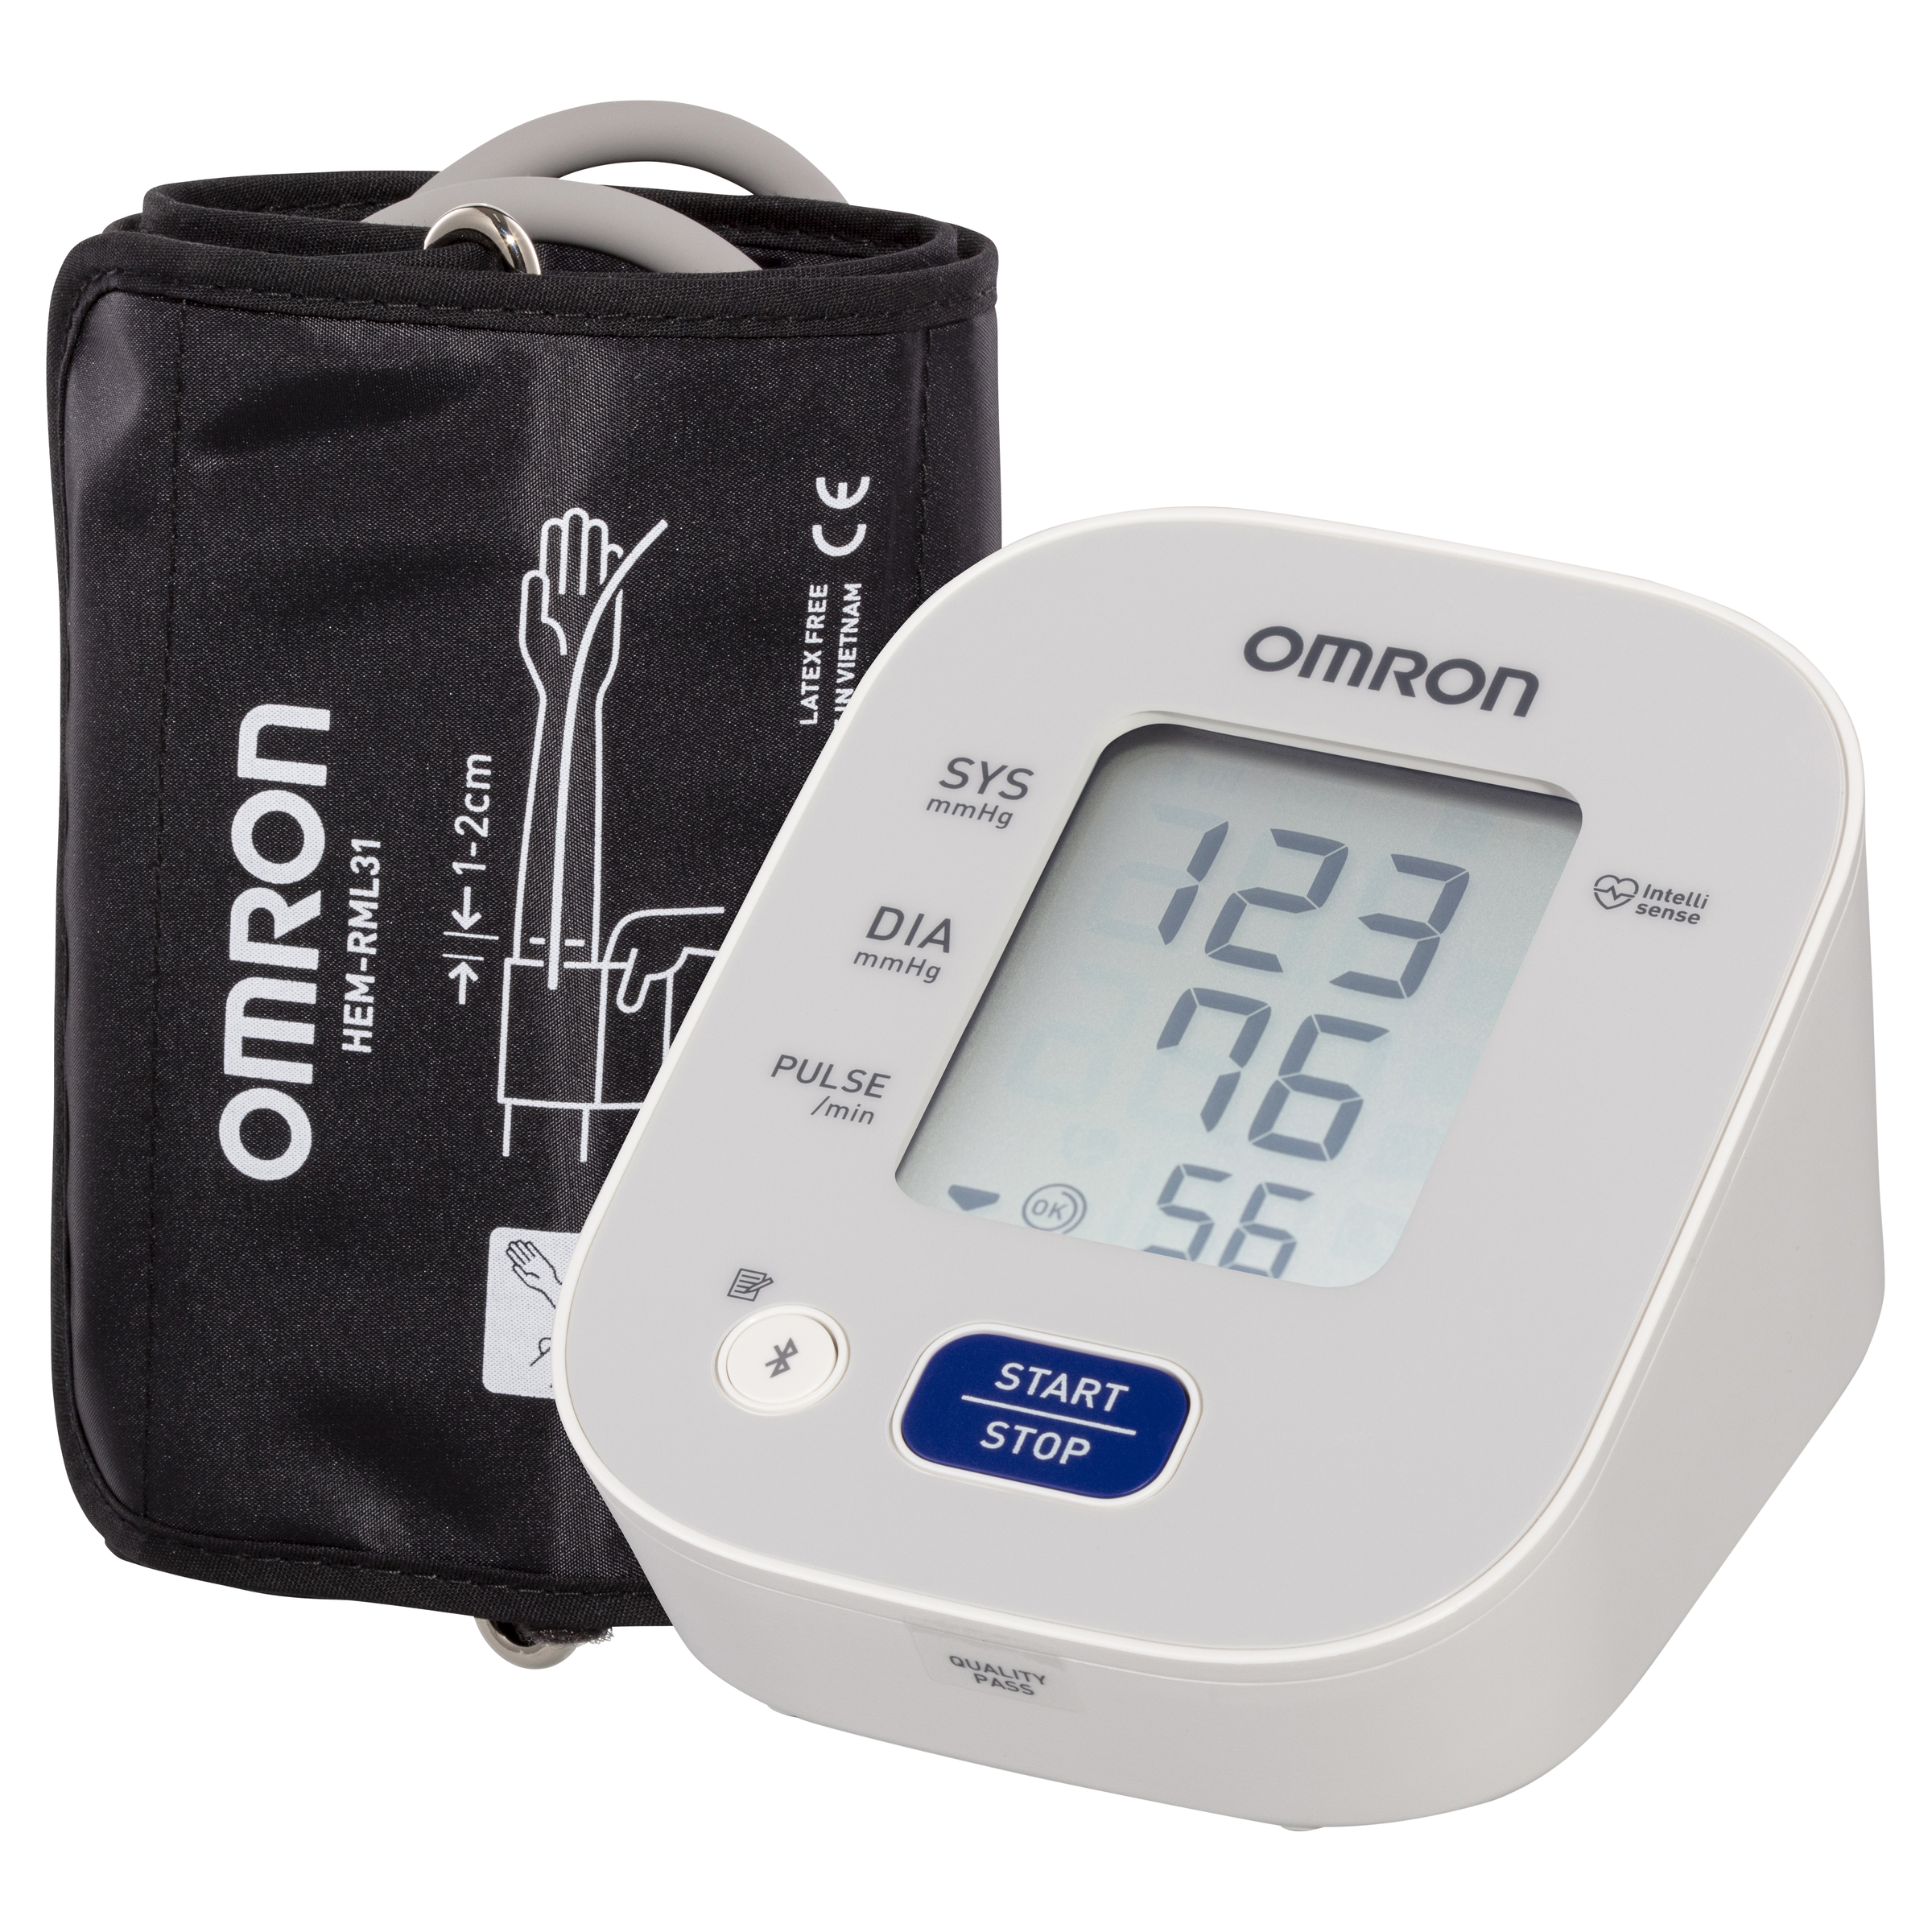 https://smartwellness.com.au/wp-content/uploads/2022/07/Omron-HEM7144T1-Standard-Blood-Pressure-Monitor-Out-of-Packaging-With-Cuff-3D.jpg